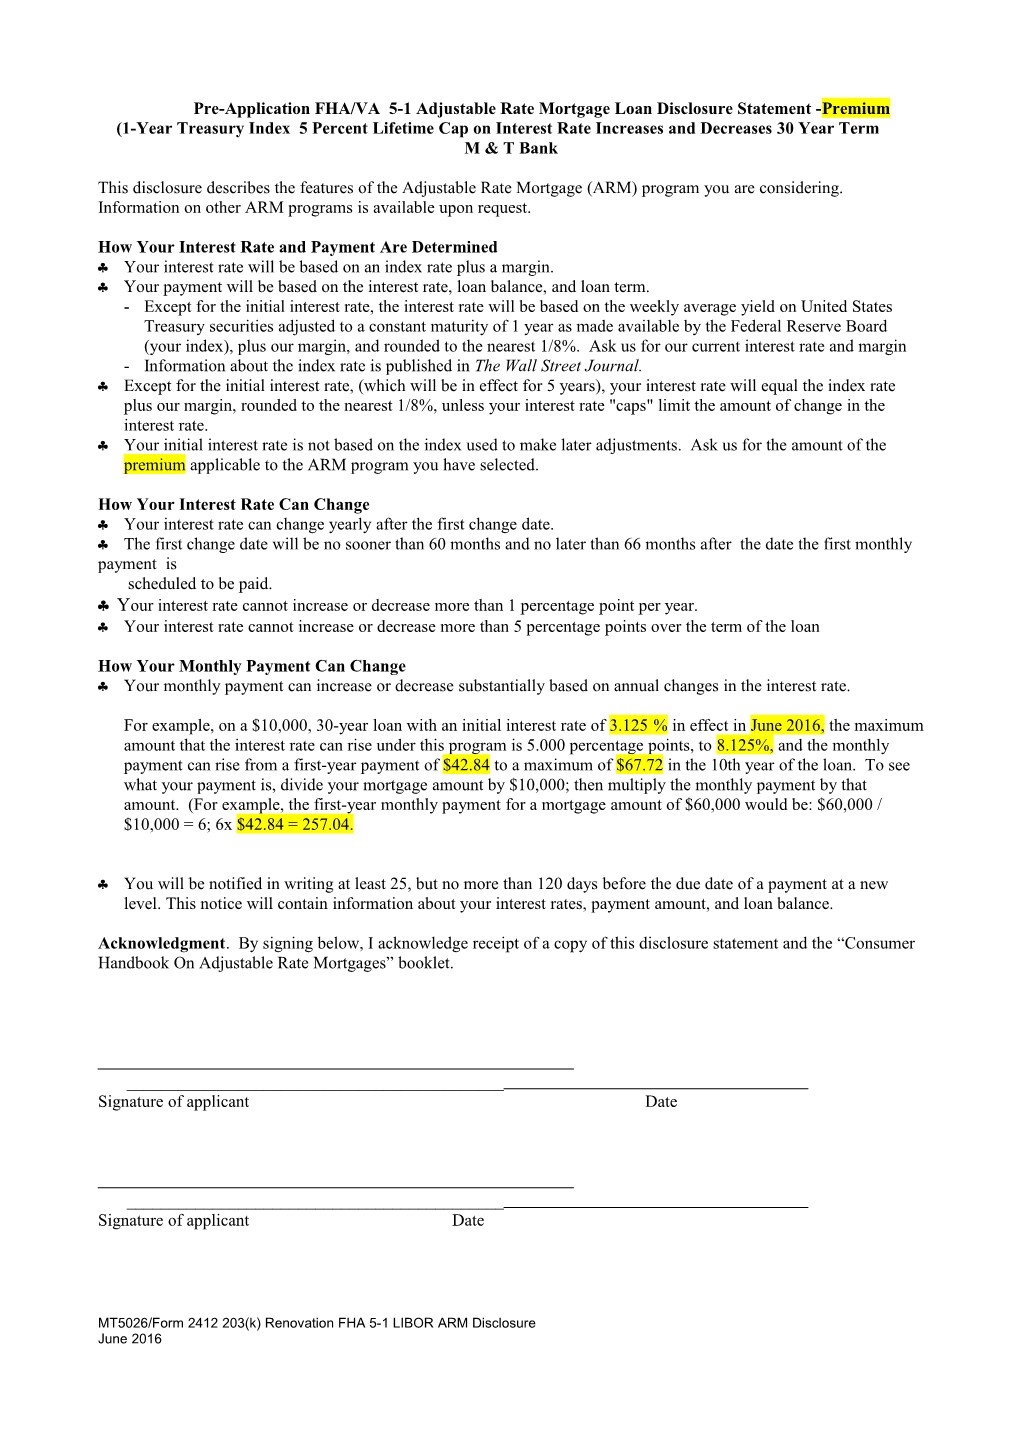 Pre-Application 5-1 Year Adjustable Rate Mortgage Loan Disclosure Statement